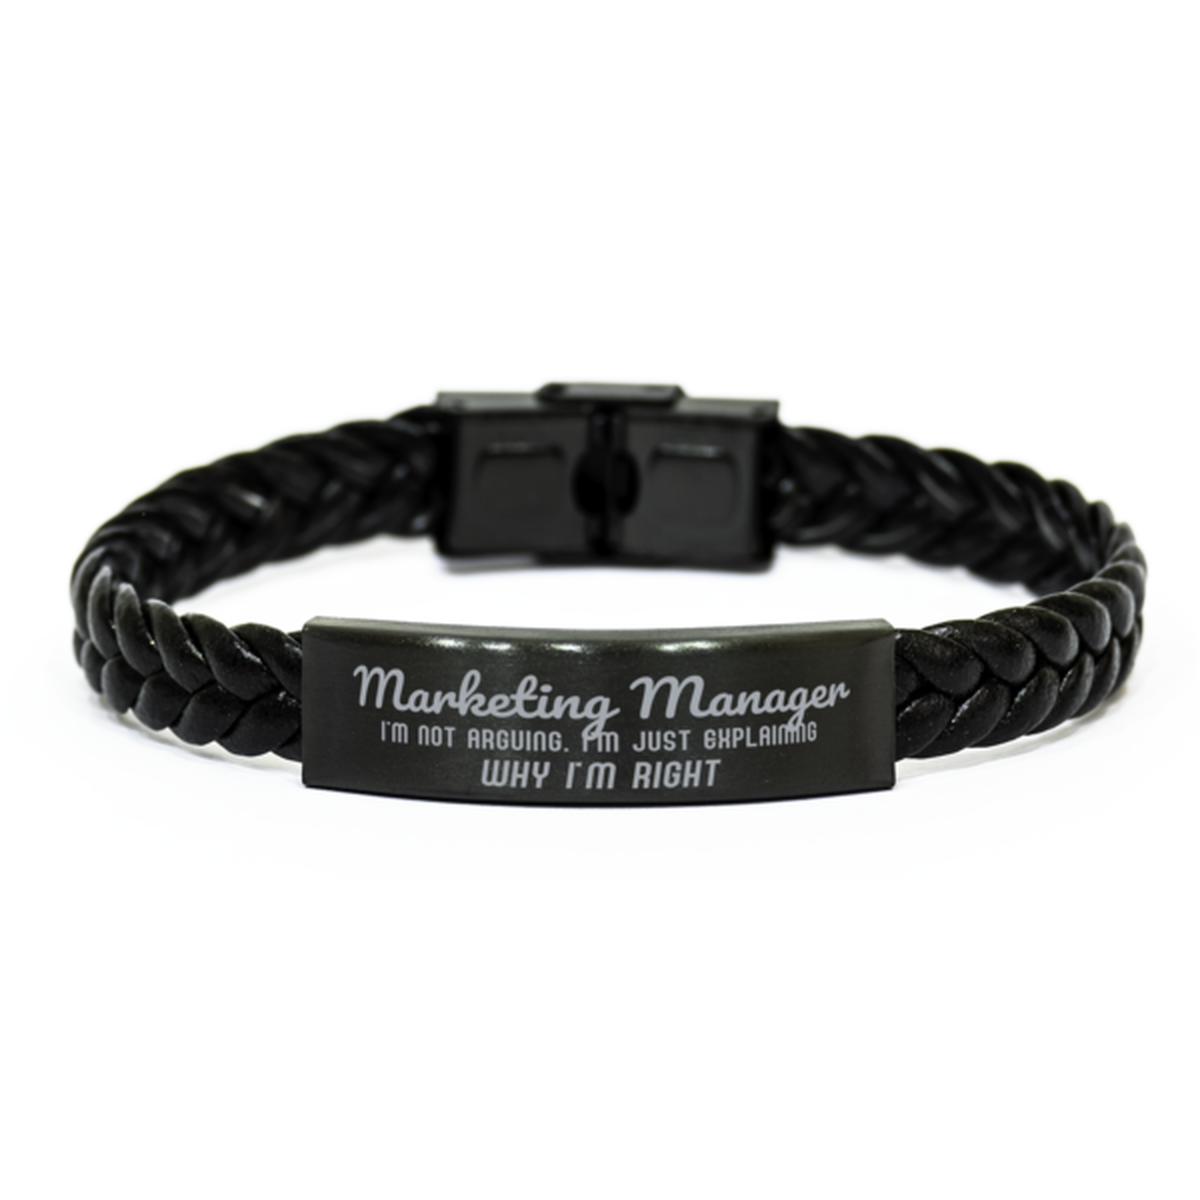 Marketing Manager I'm not Arguing. I'm Just Explaining Why I'm RIGHT Braided Leather Bracelet, Graduation Birthday Christmas Marketing Manager Gifts For Marketing Manager Funny Saying Quote Present for Men Women Coworker